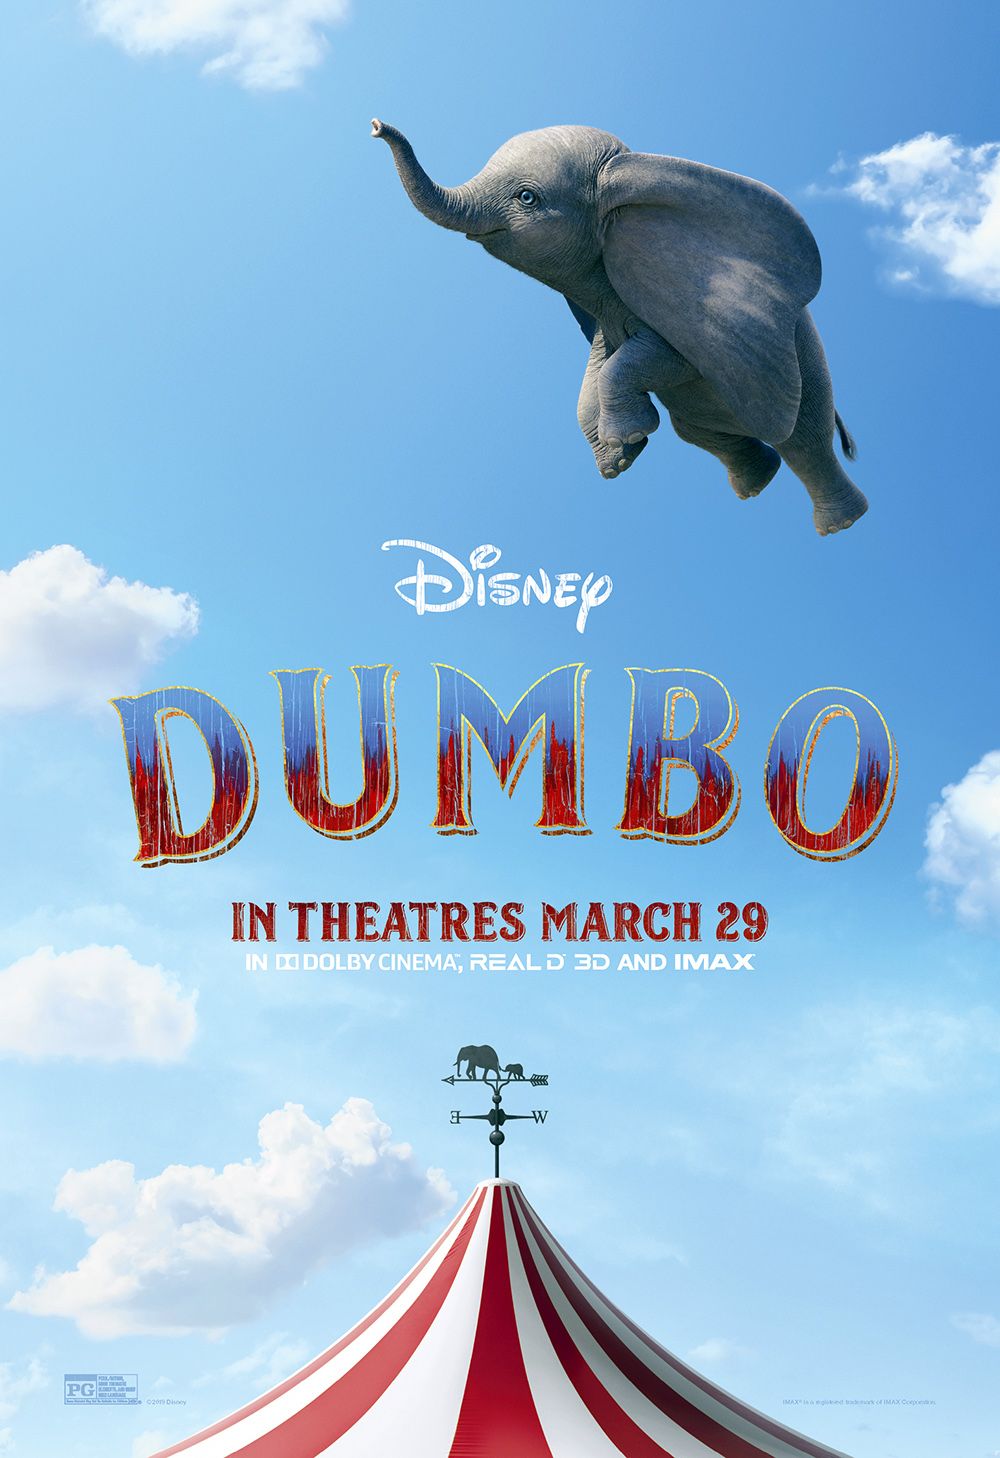 Dumbo Celebrates World Premiere With New Poster And Behind The Scenes Featurette